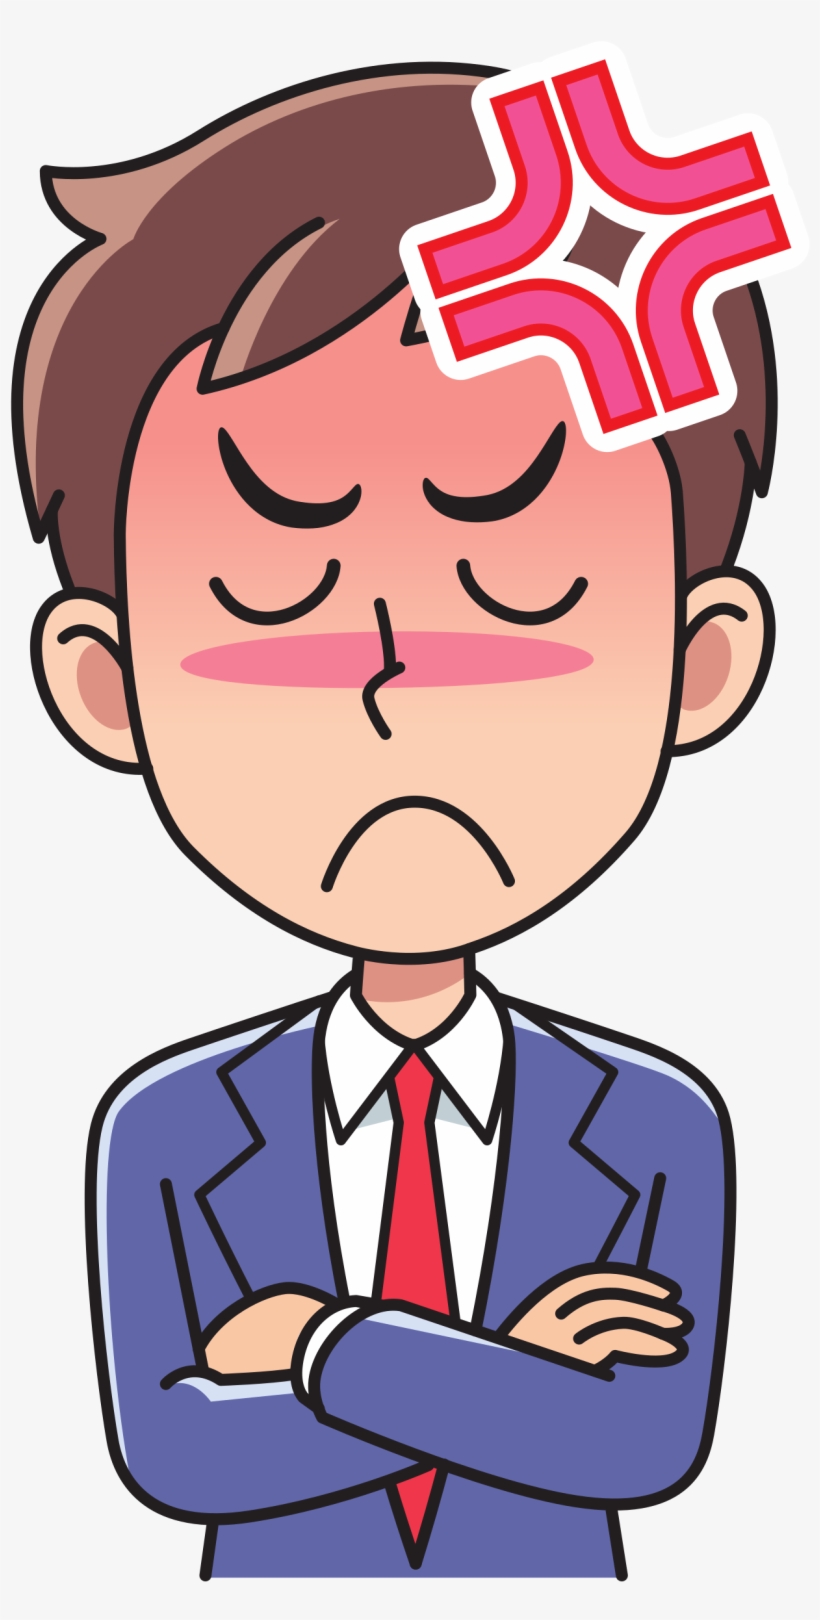 Business Man Angry Big Image Png - Thinking Man Clip Art, transparent png #313020